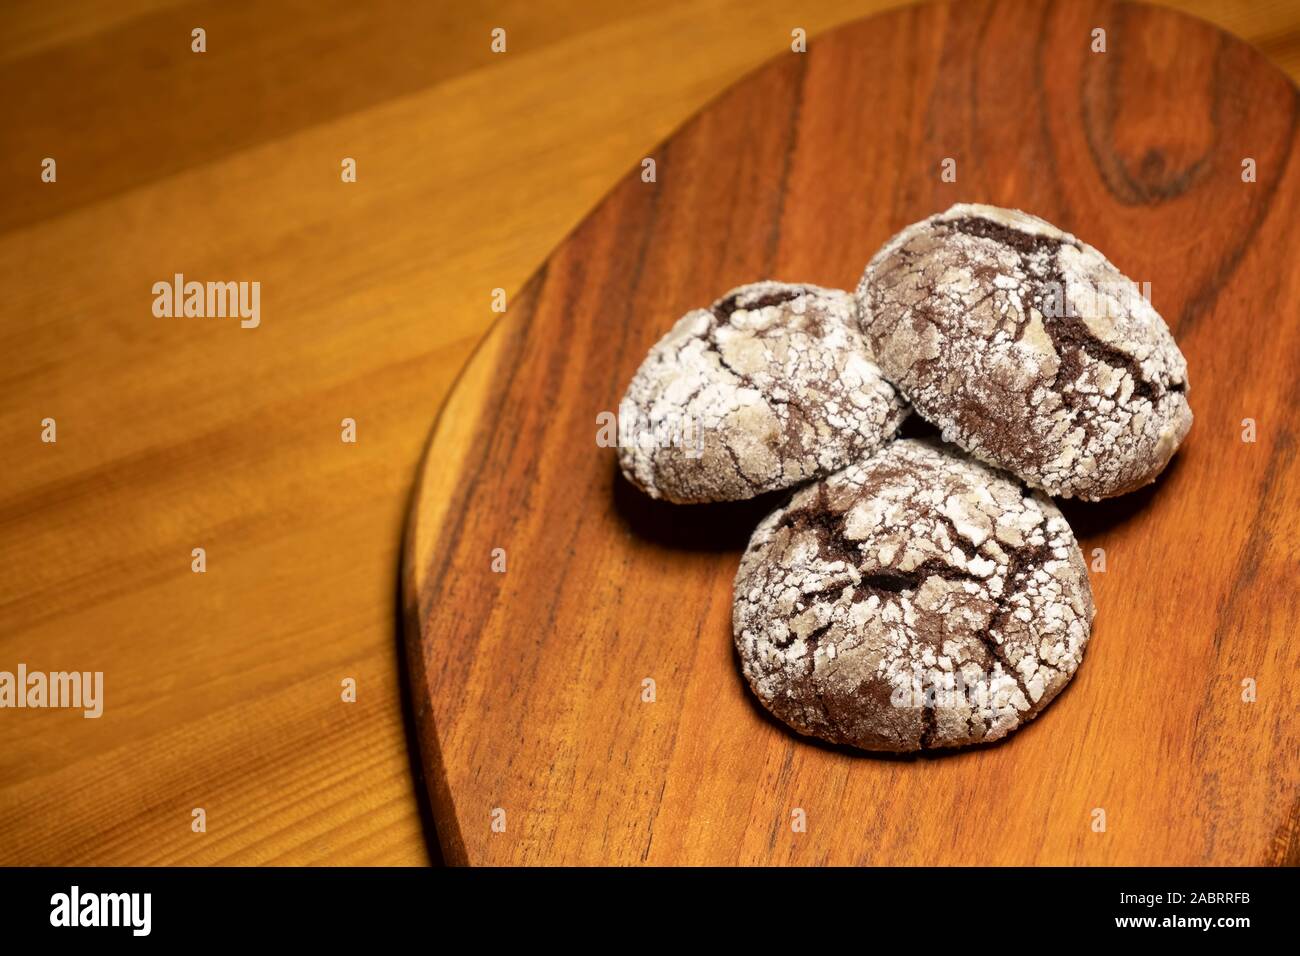 Cracked Chocolate Cookies On A Wooden Surface Stock Photo